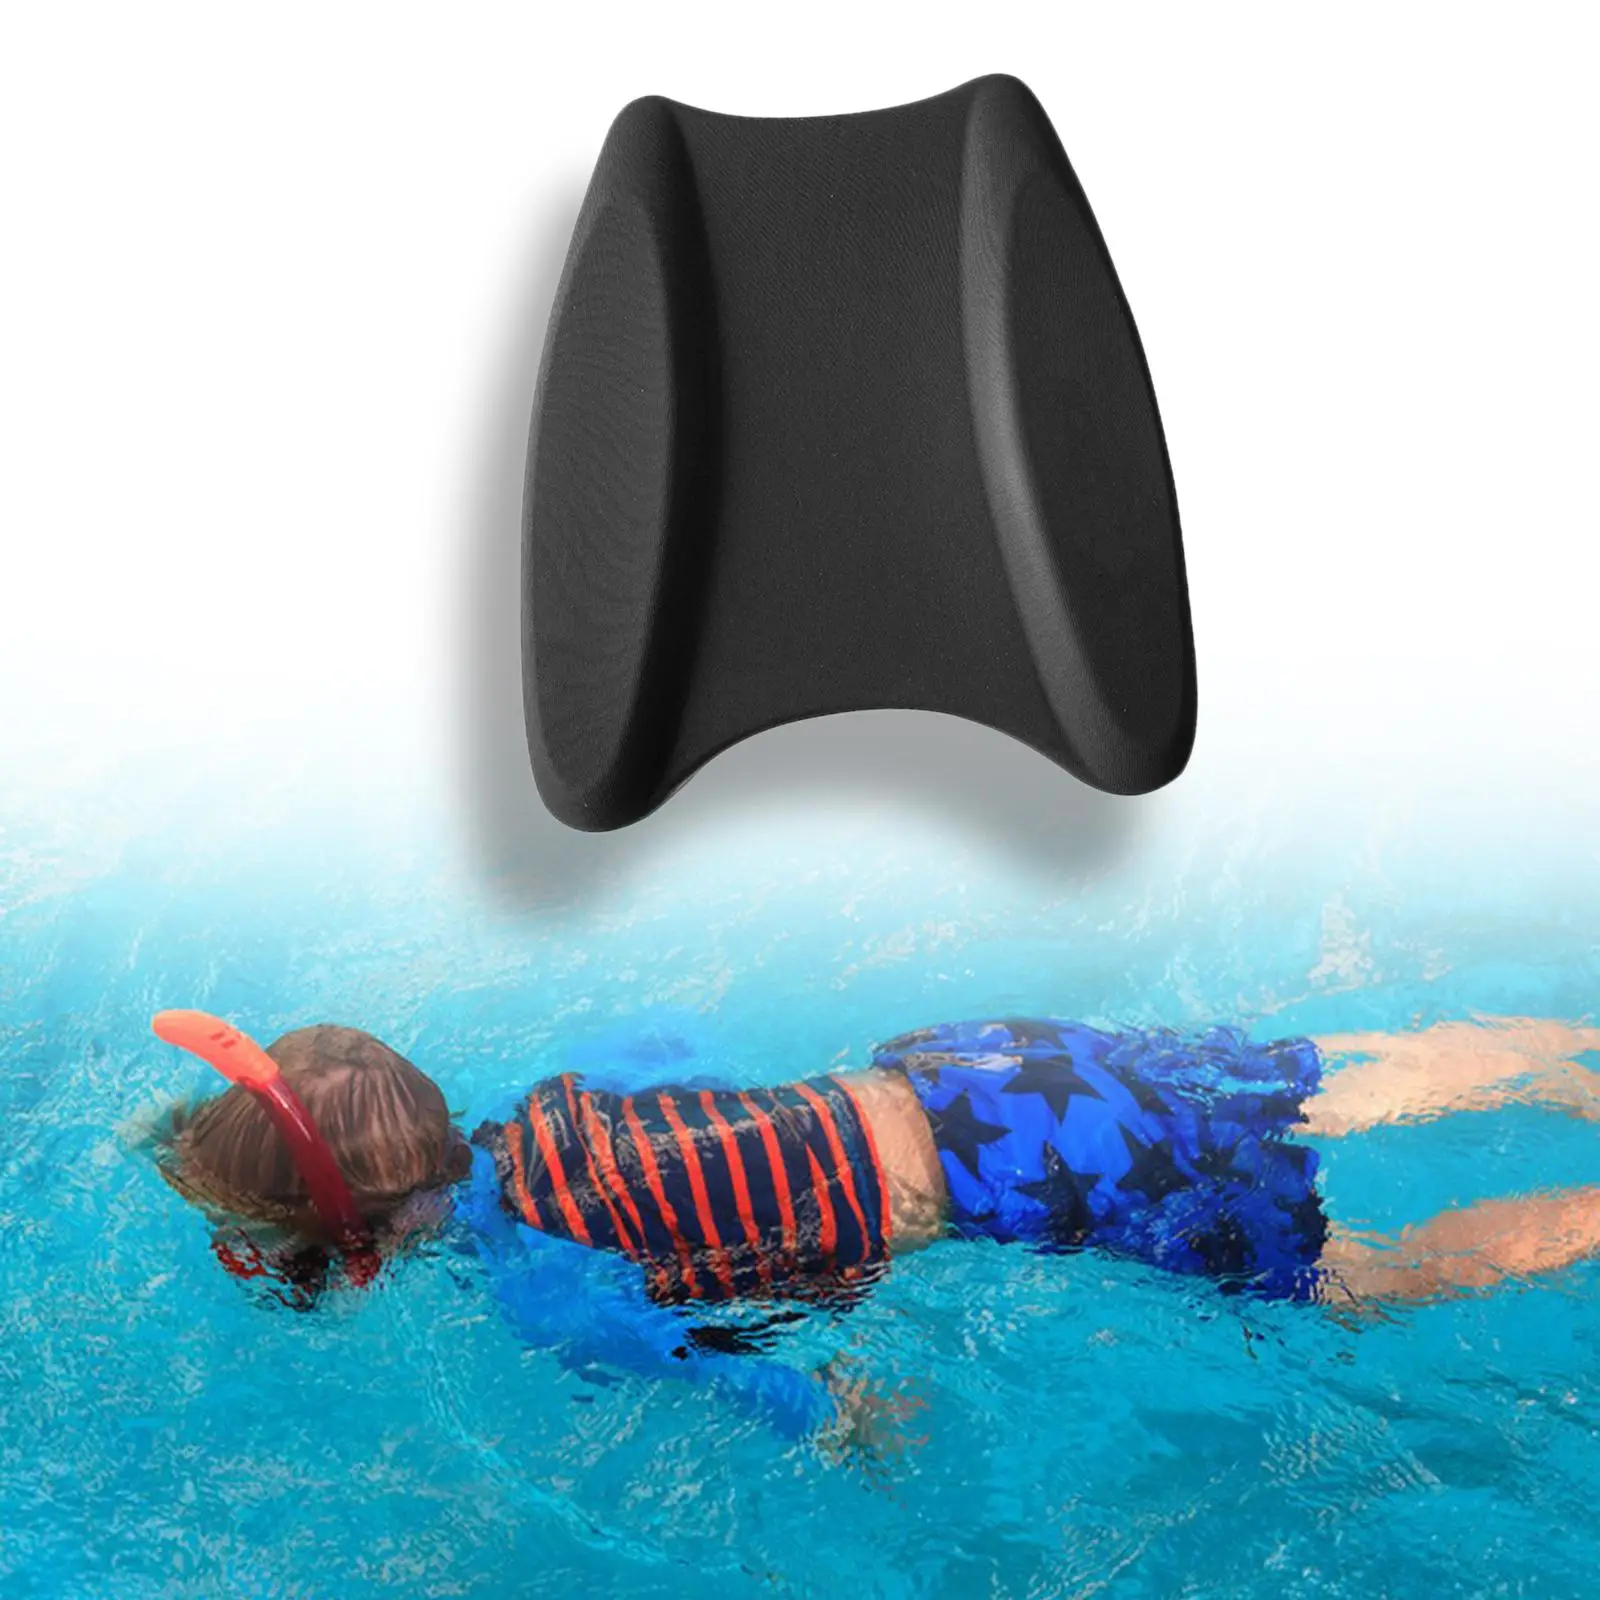 Swimming Hand Float Hand Paddle Professional Floating Plate Buoyancy Swim Board for Swimmers Children Adults Kids Party Supplies